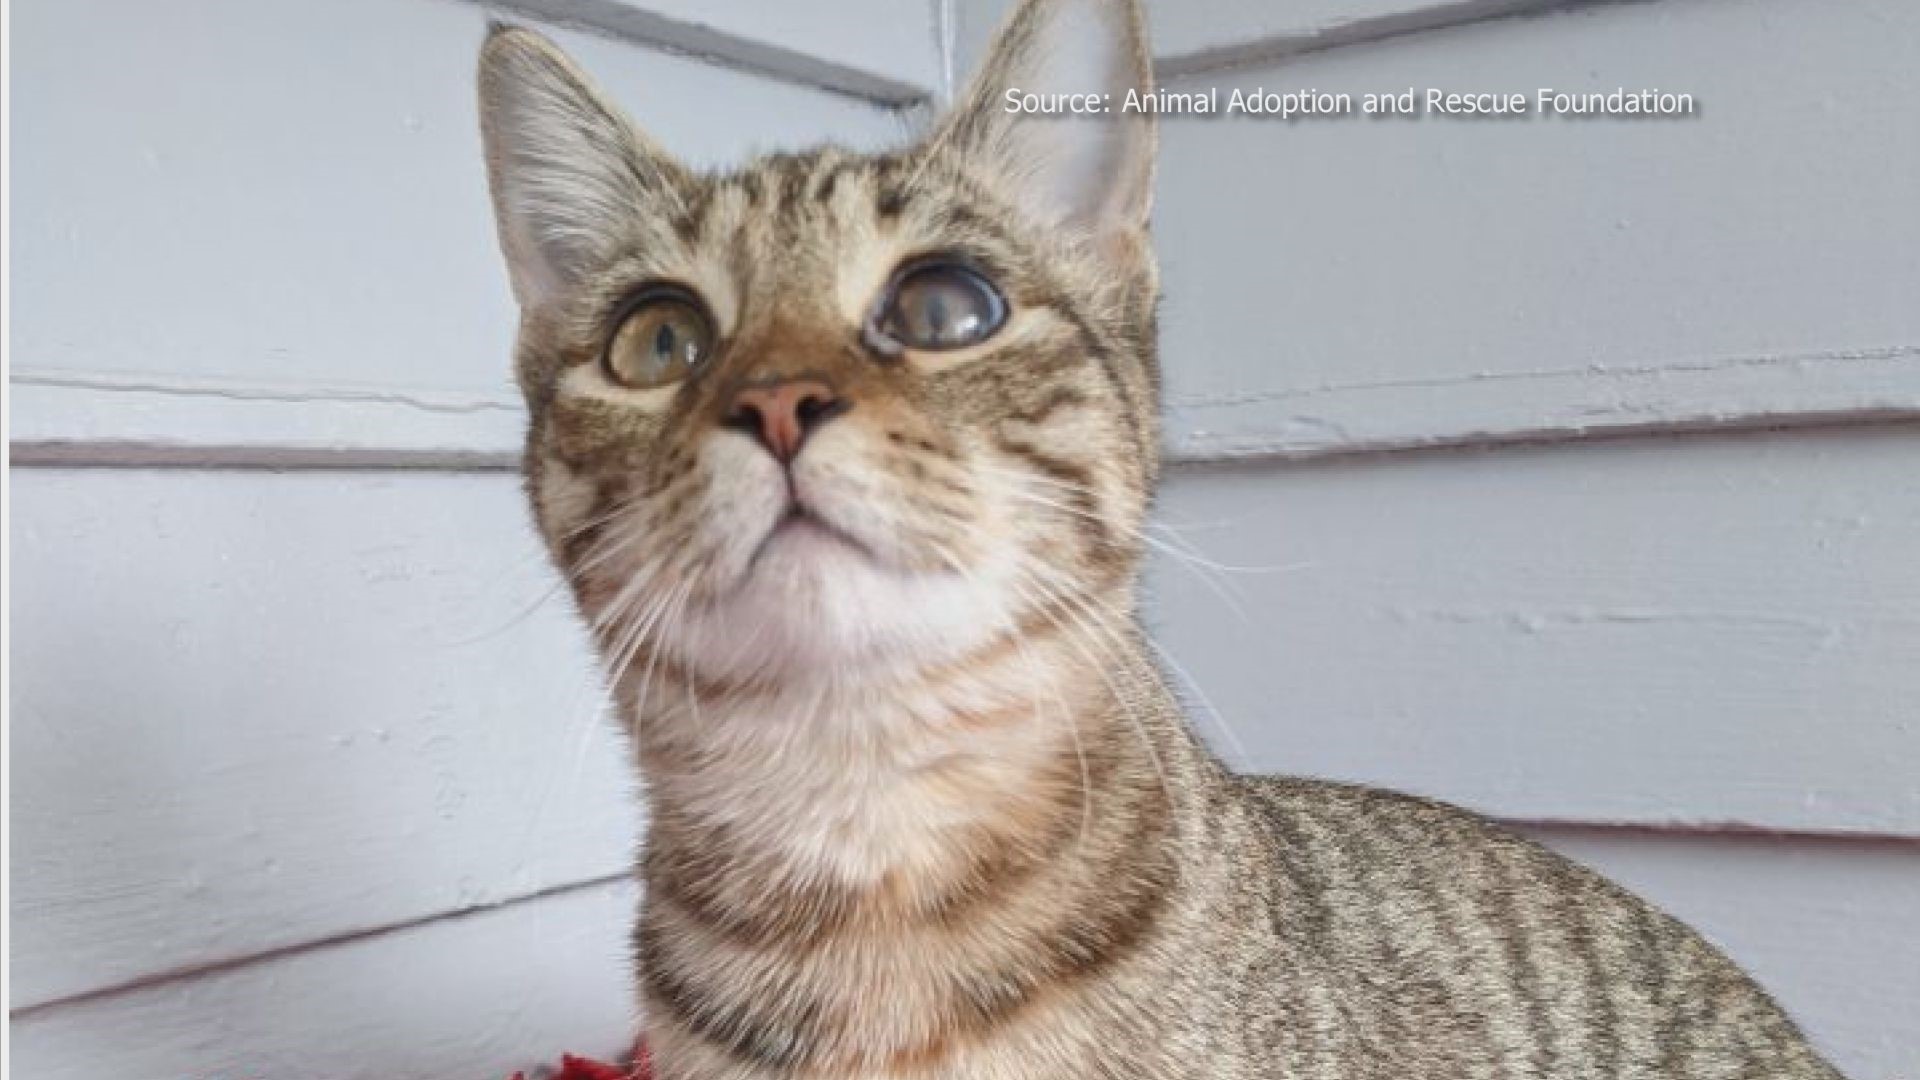 This Playful Kitty Could Spring Into Your Heart and home.